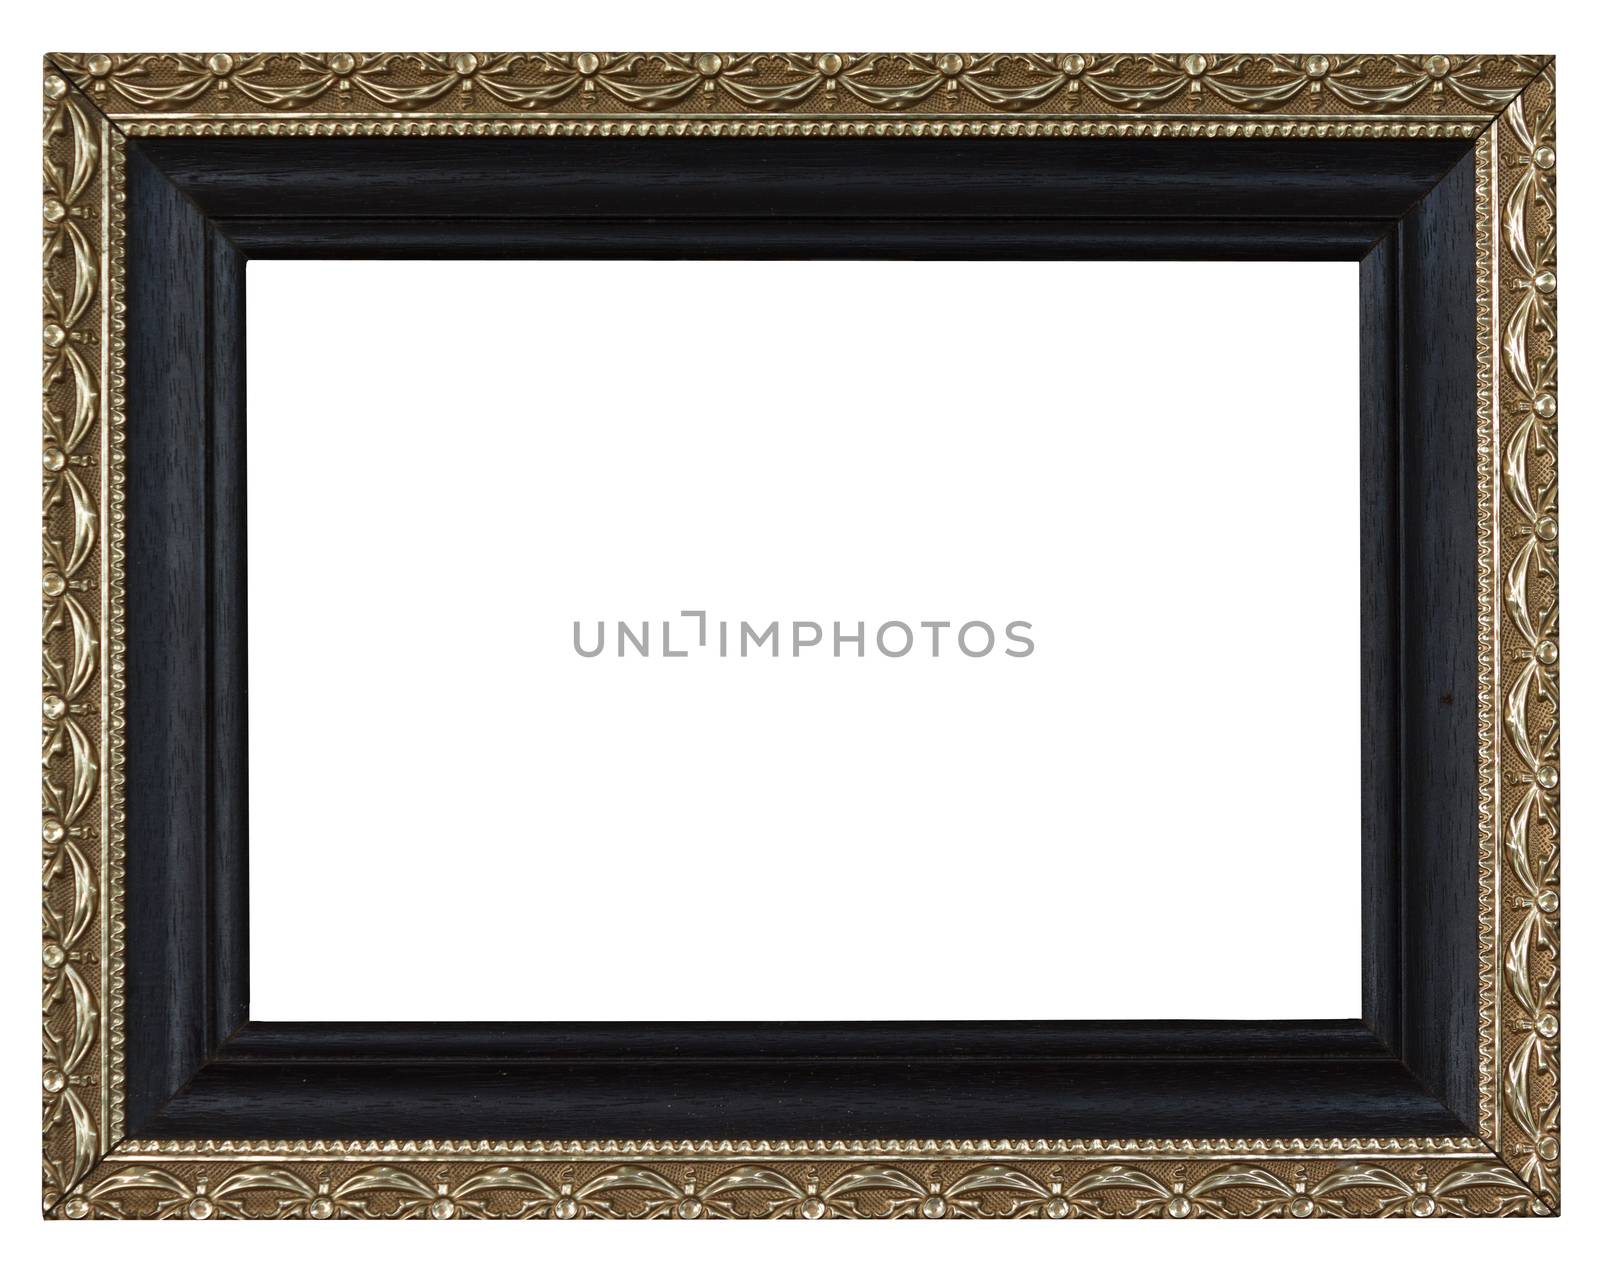 The antique gold frame on the white background by kaisorn